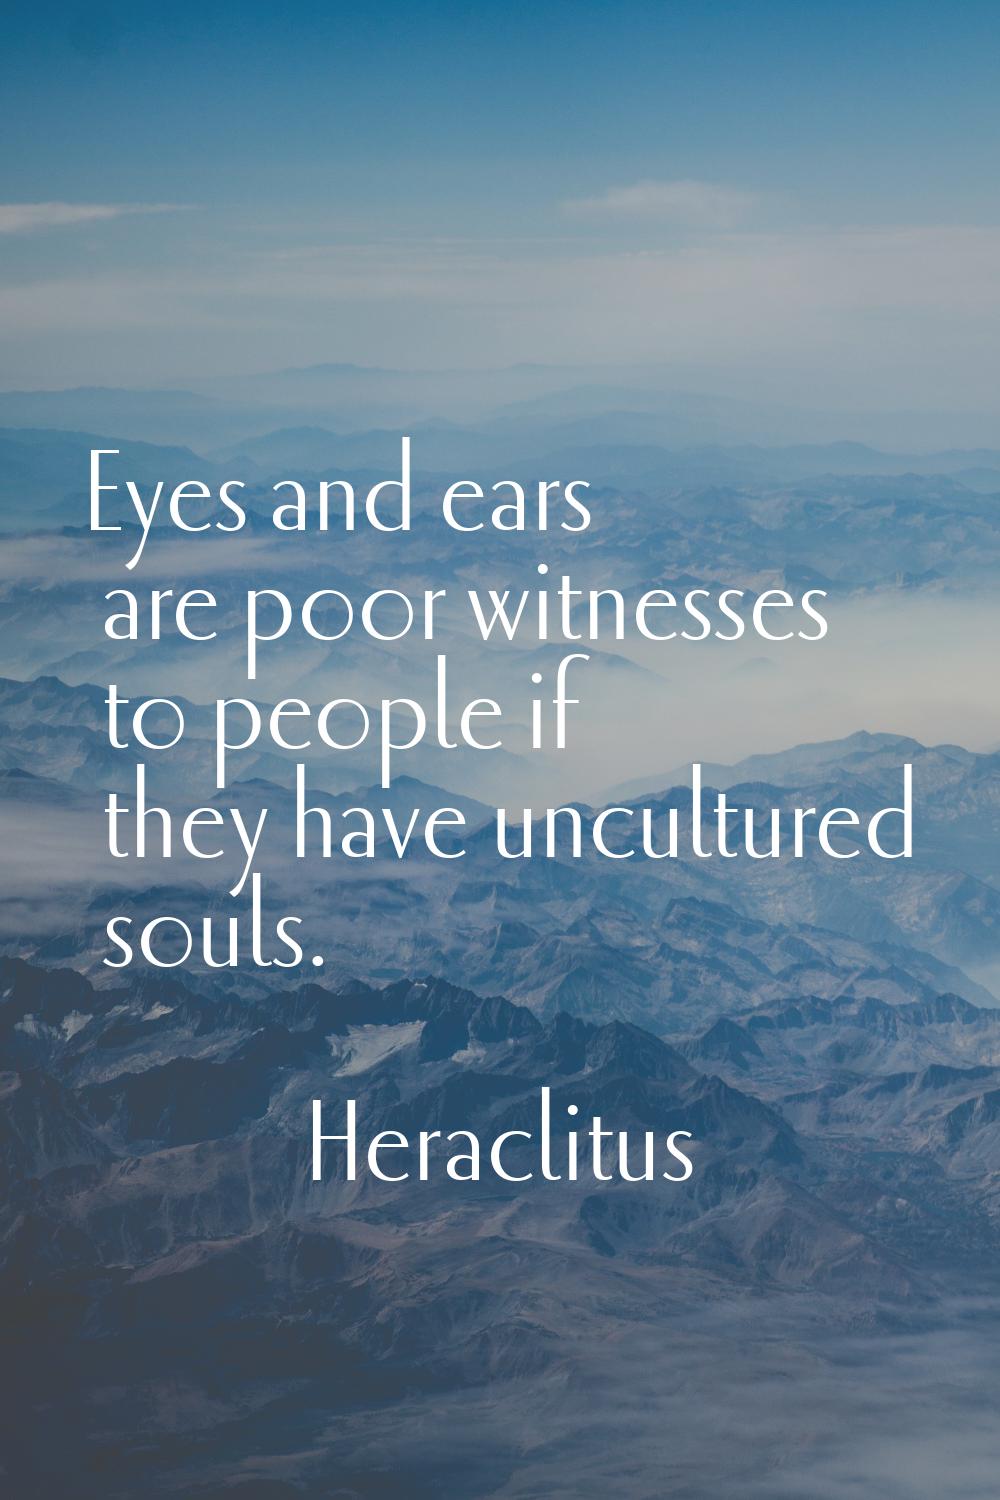 Eyes and ears are poor witnesses to people if they have uncultured souls.